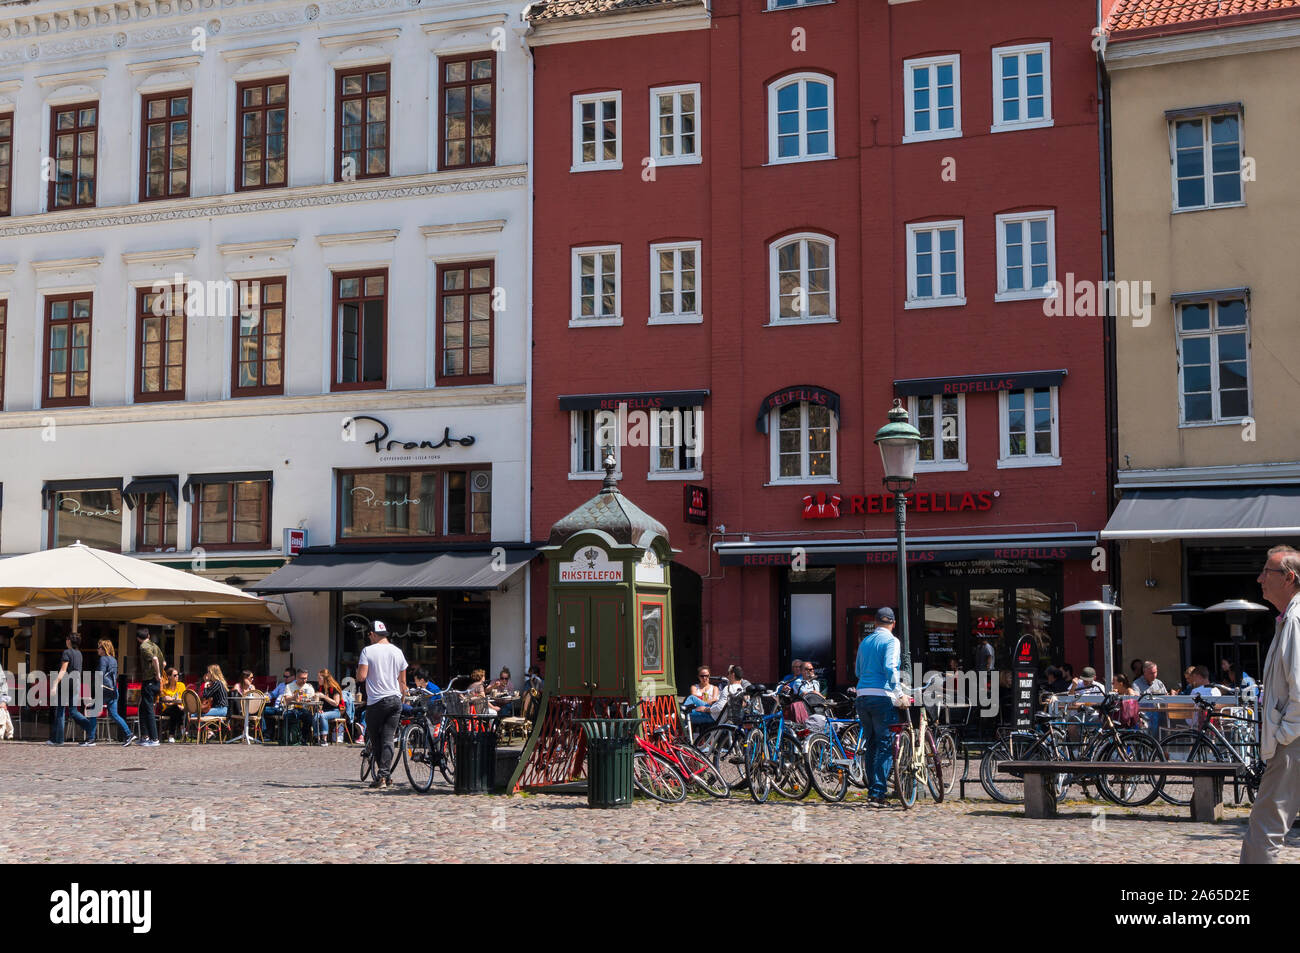 Gamla Vaster, historical district of Malmo with colorful and picturesque  buildings. Stortorget square in Malmo, Sweden Stock Photo - Alamy